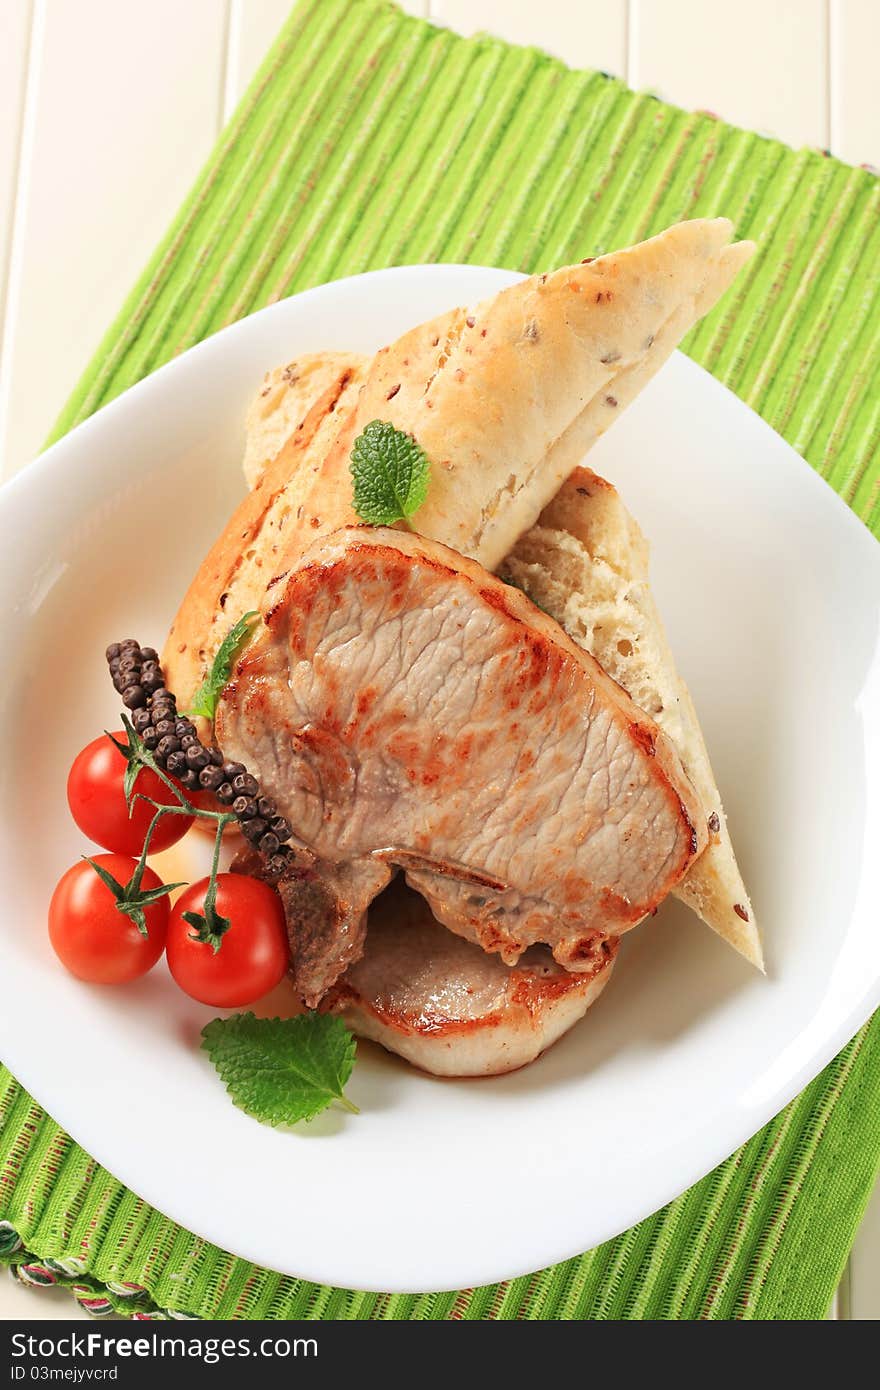 Juicy pork chops and whole wheat roll. Juicy pork chops and whole wheat roll